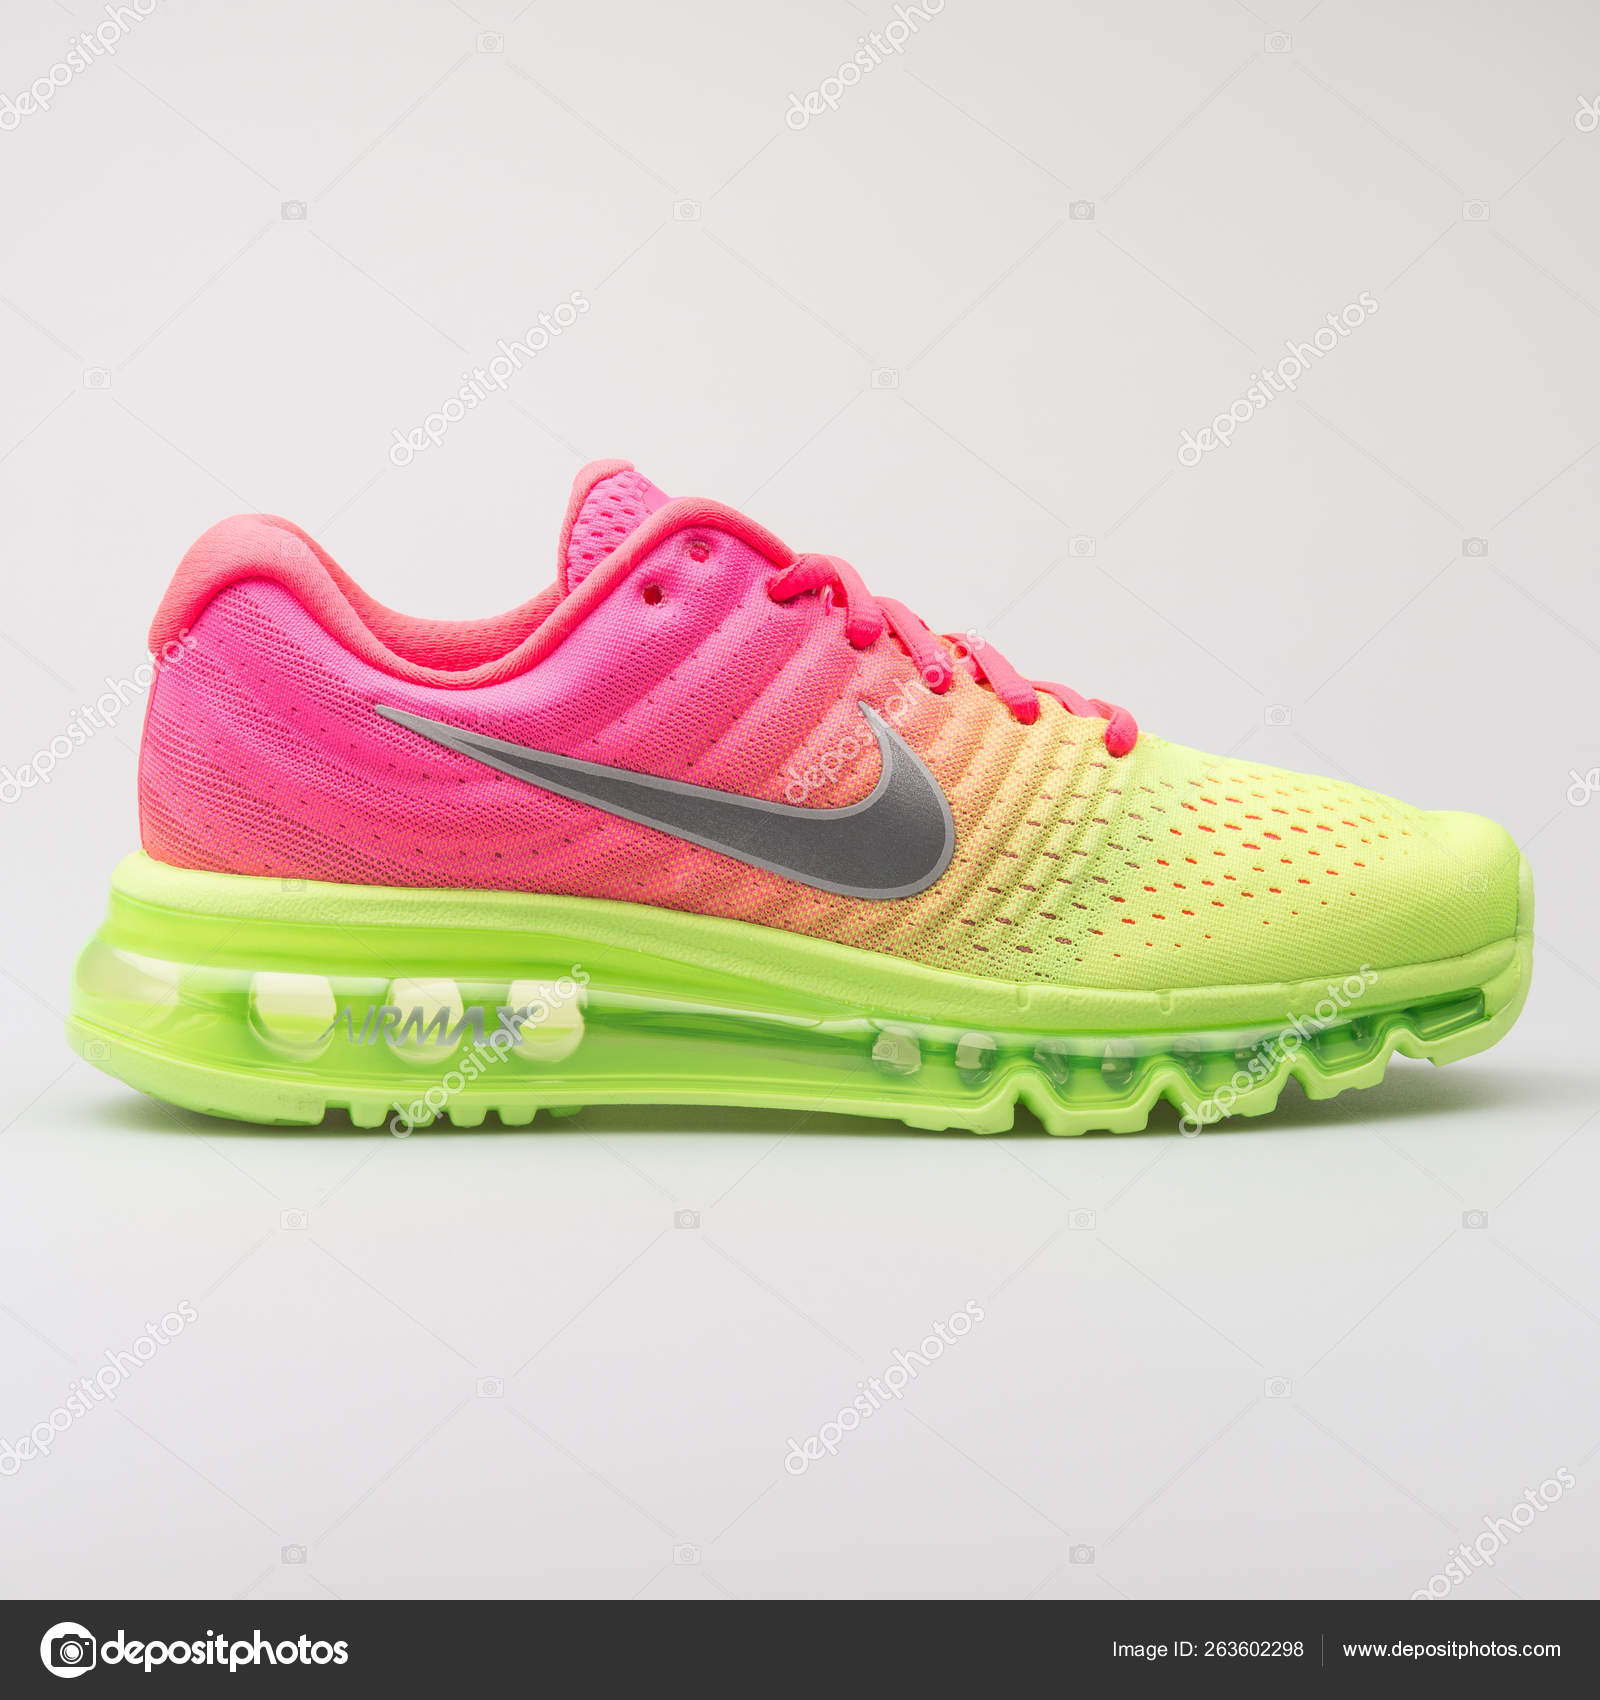 Nike Air Max Jewell Premium pink and 